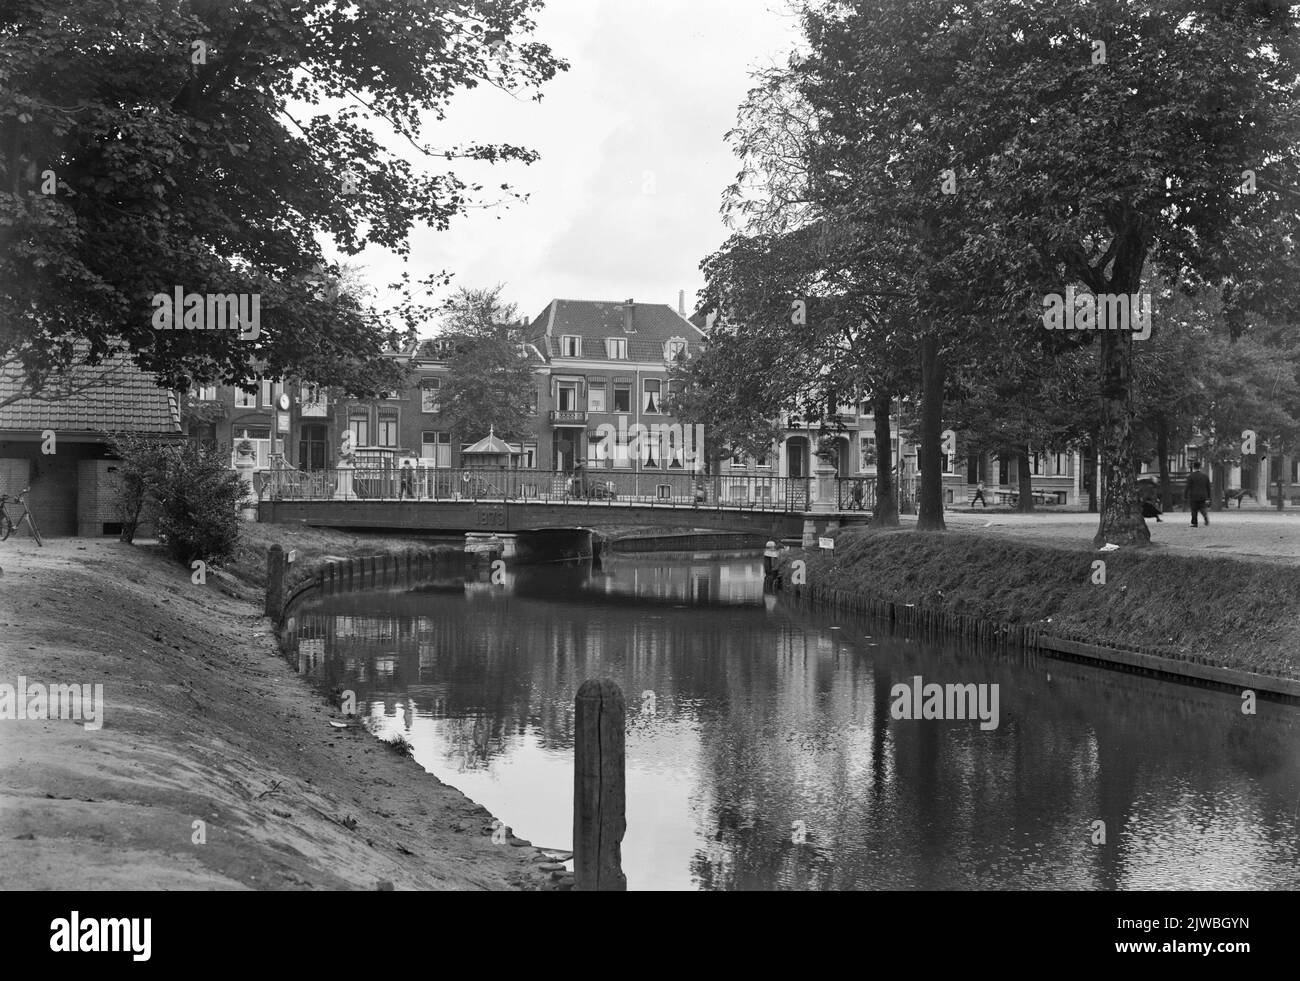 View of the Noorderbrug over the Stadsbuitengracht in Utrecht, from the west. In the background some houses on the Weerdsingel O.Z. Stock Photo